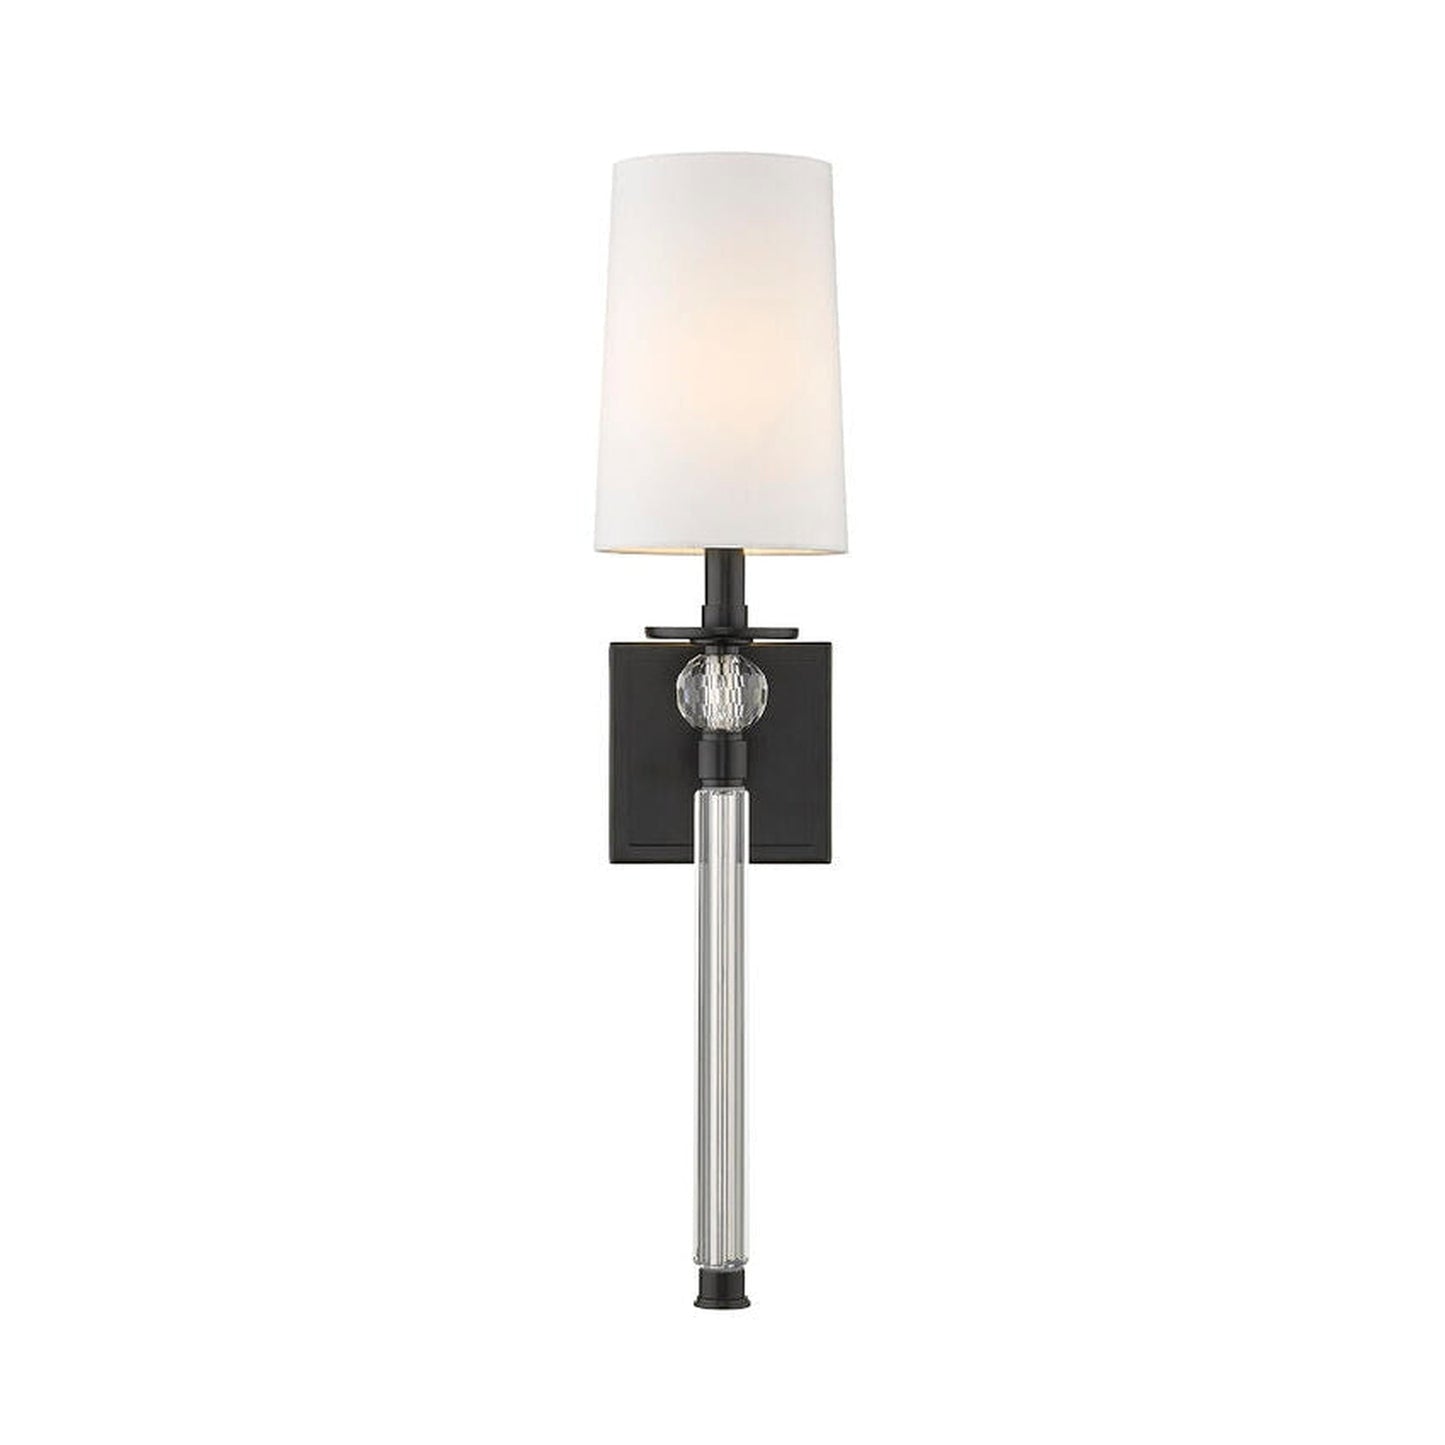 Z-Lite Mia 6" 1-Light Matte Black Wall Sconce With White Fabric Shade